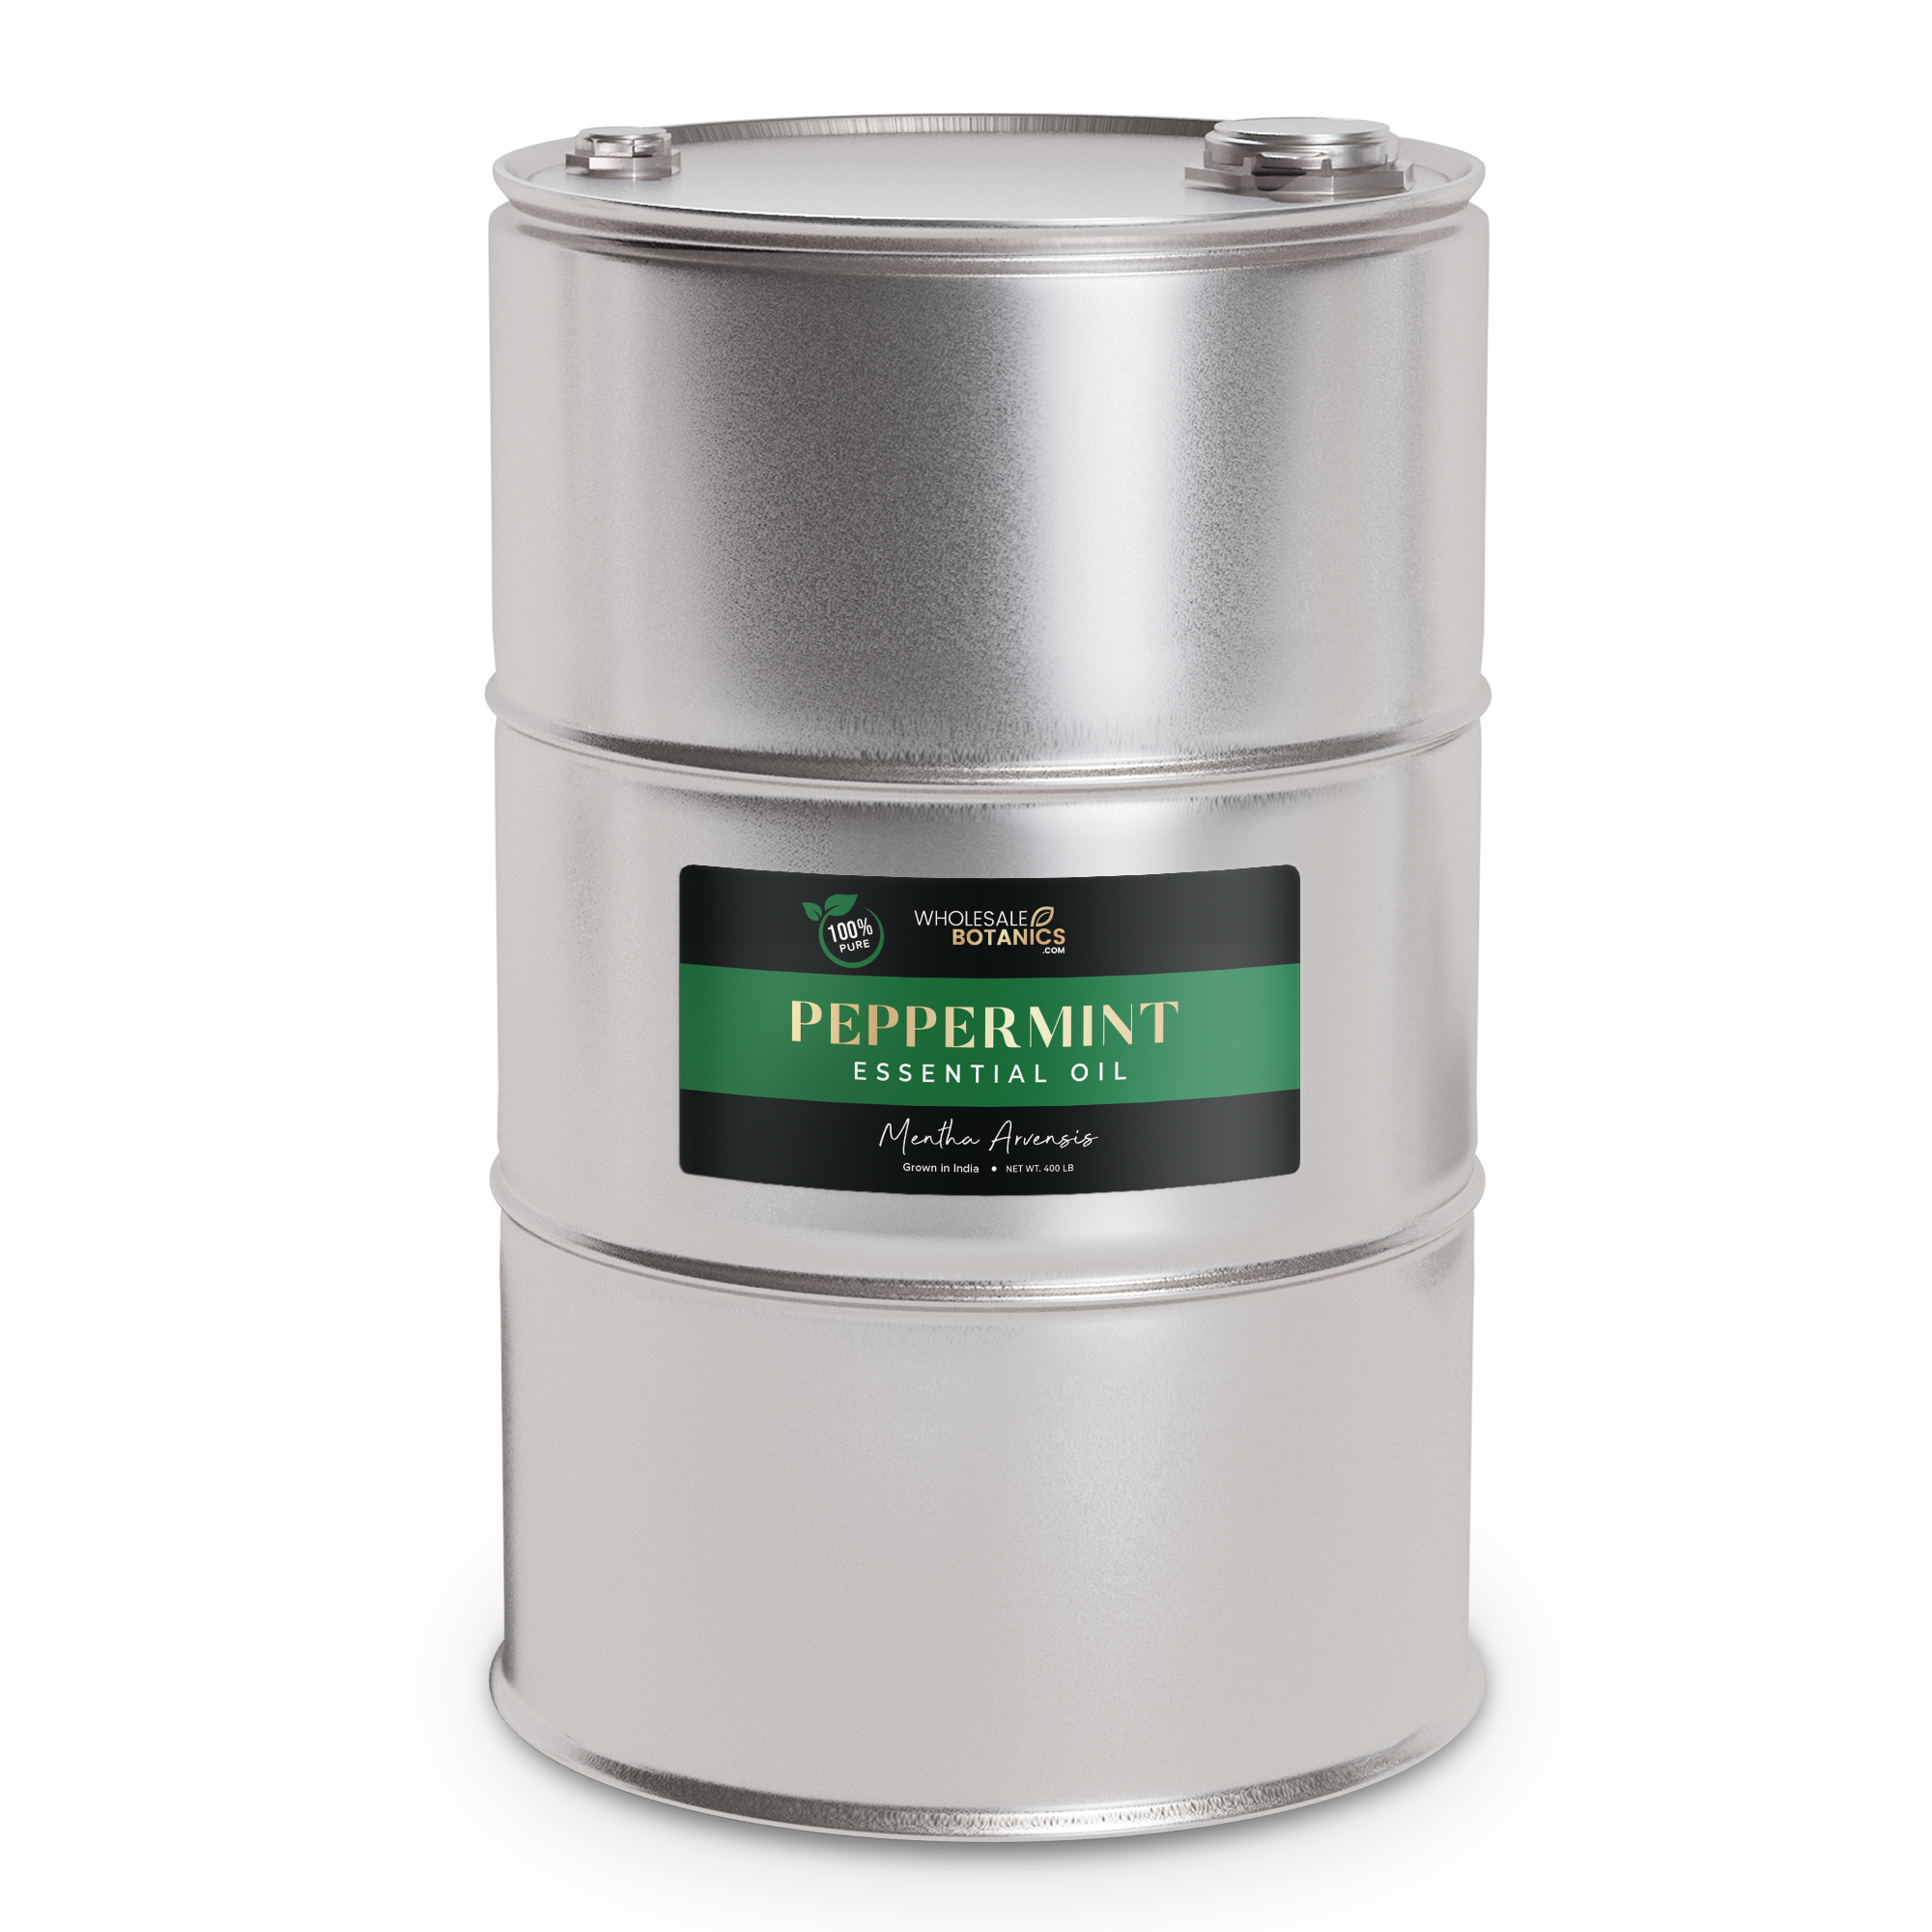 Purity Peppermint Essential Oil - Pure Mentha Arvensis - 400 lb